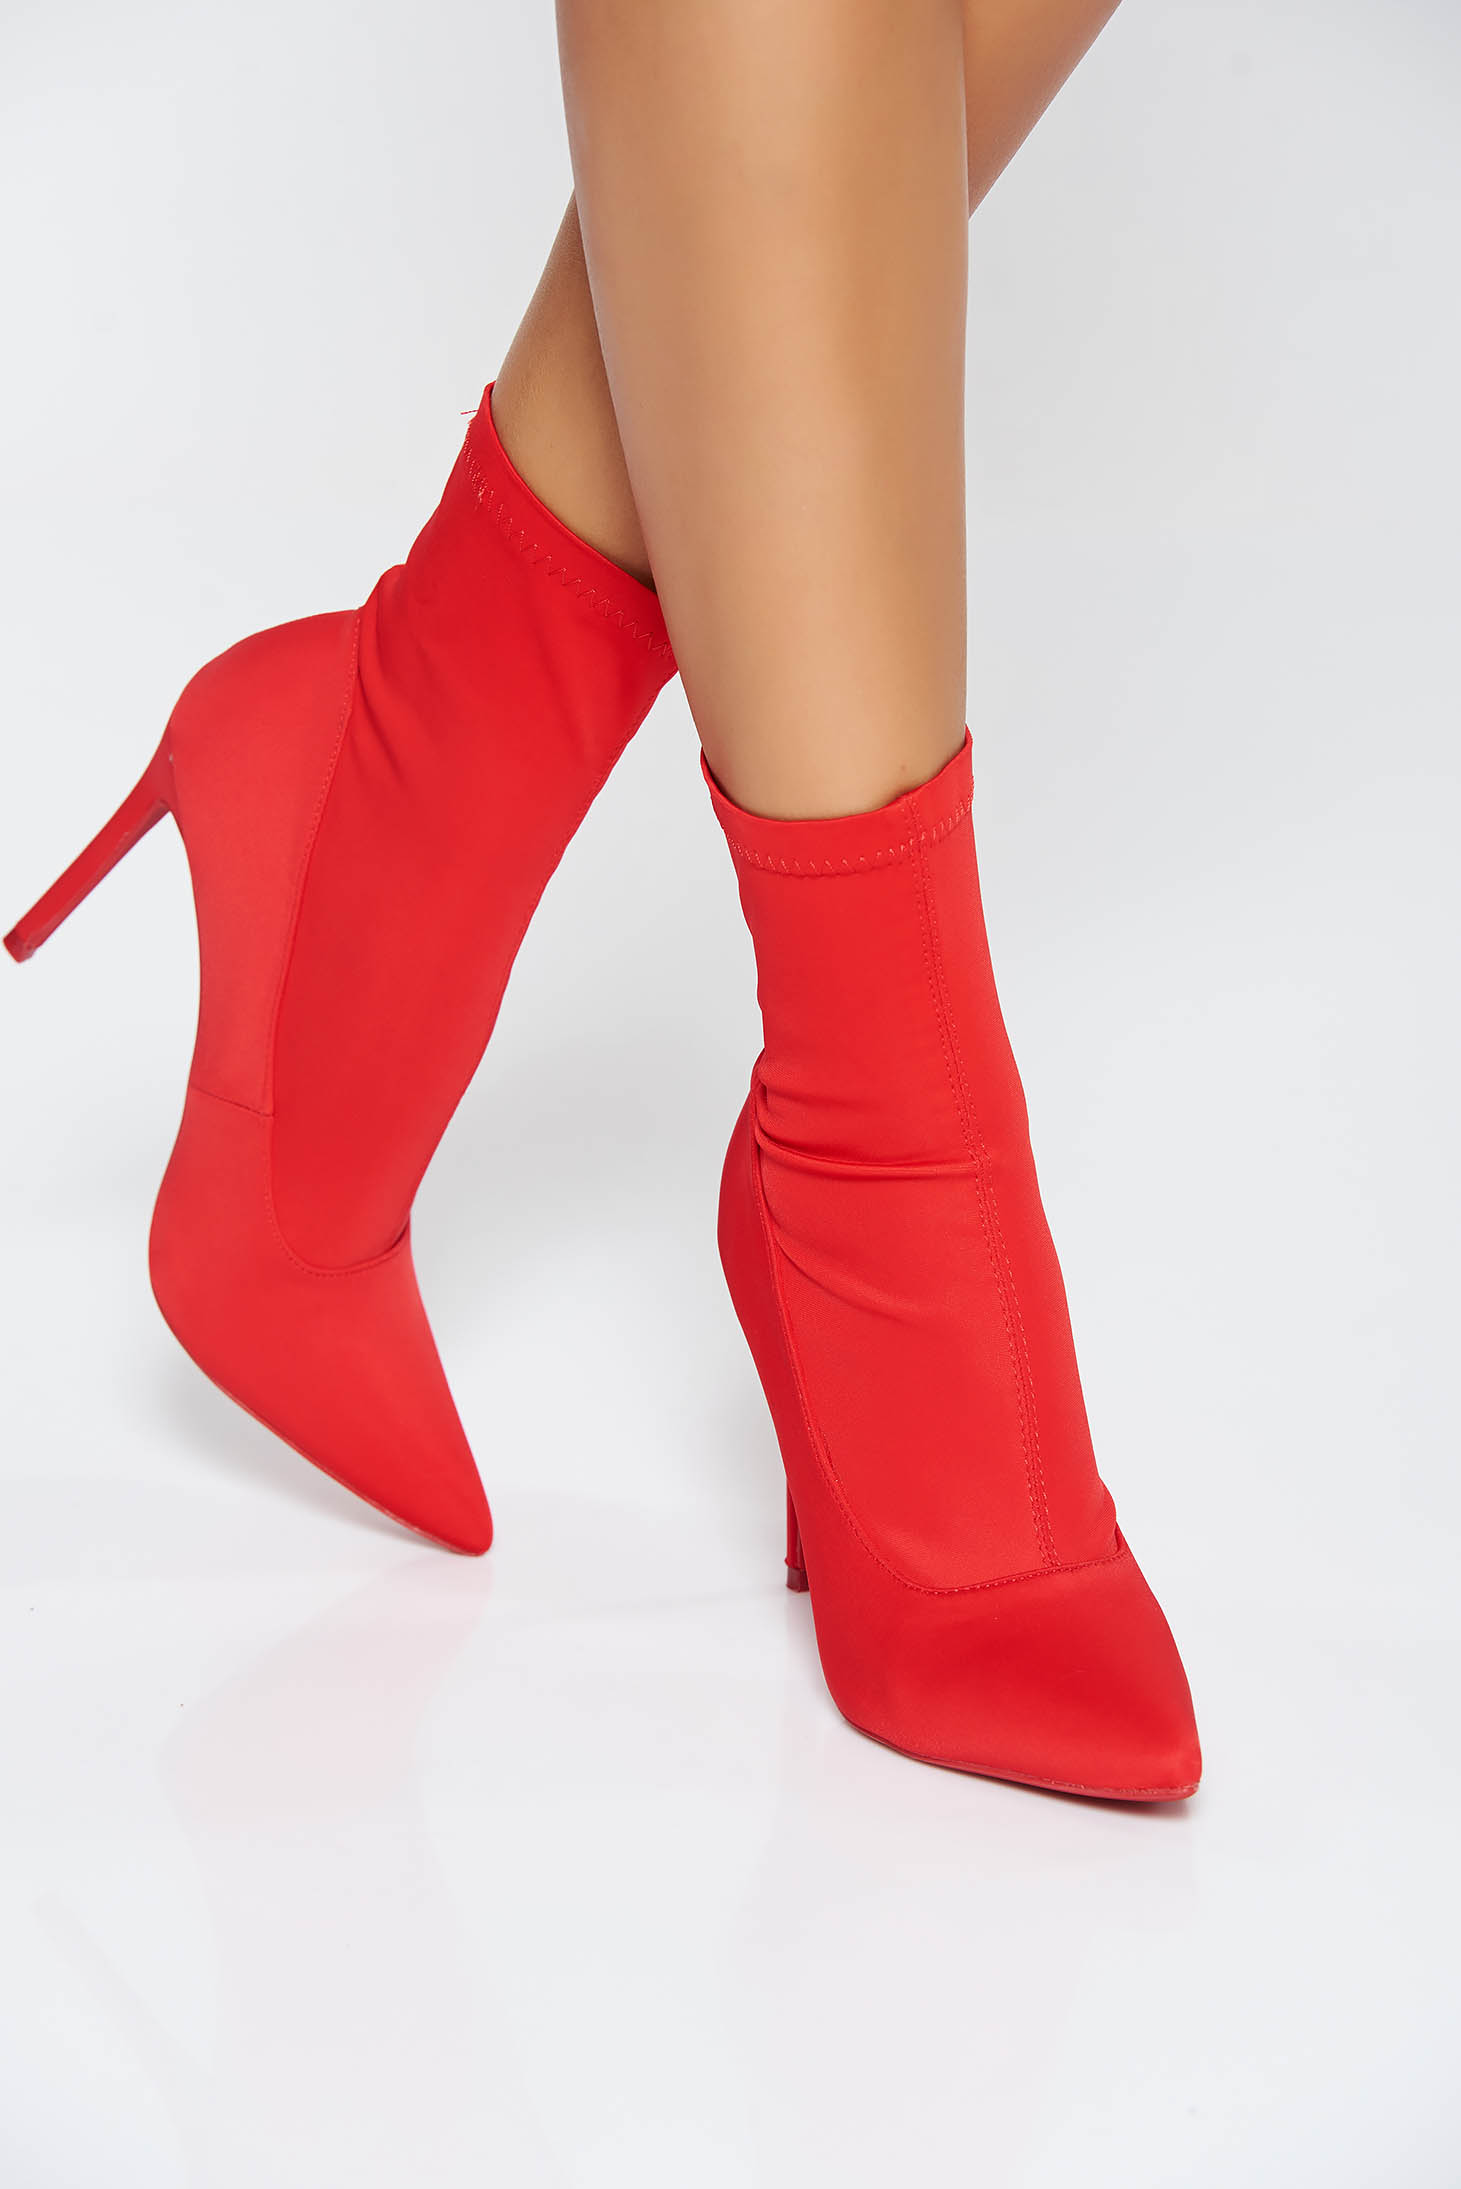 red tip boots